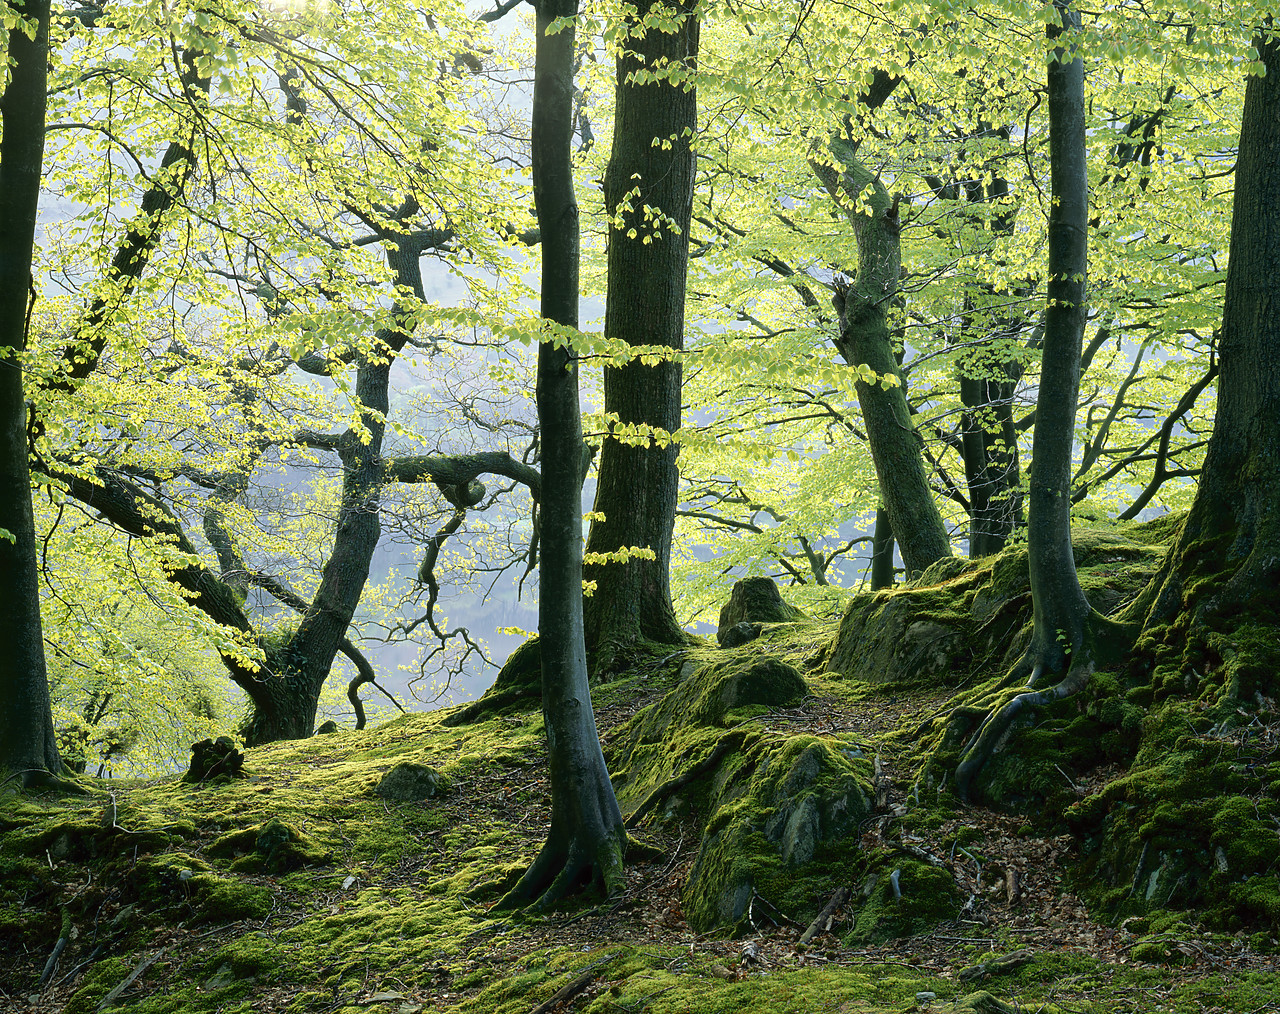 #934228 - Mossy Forest in Spring, Lake District National Park, Cumbria, England